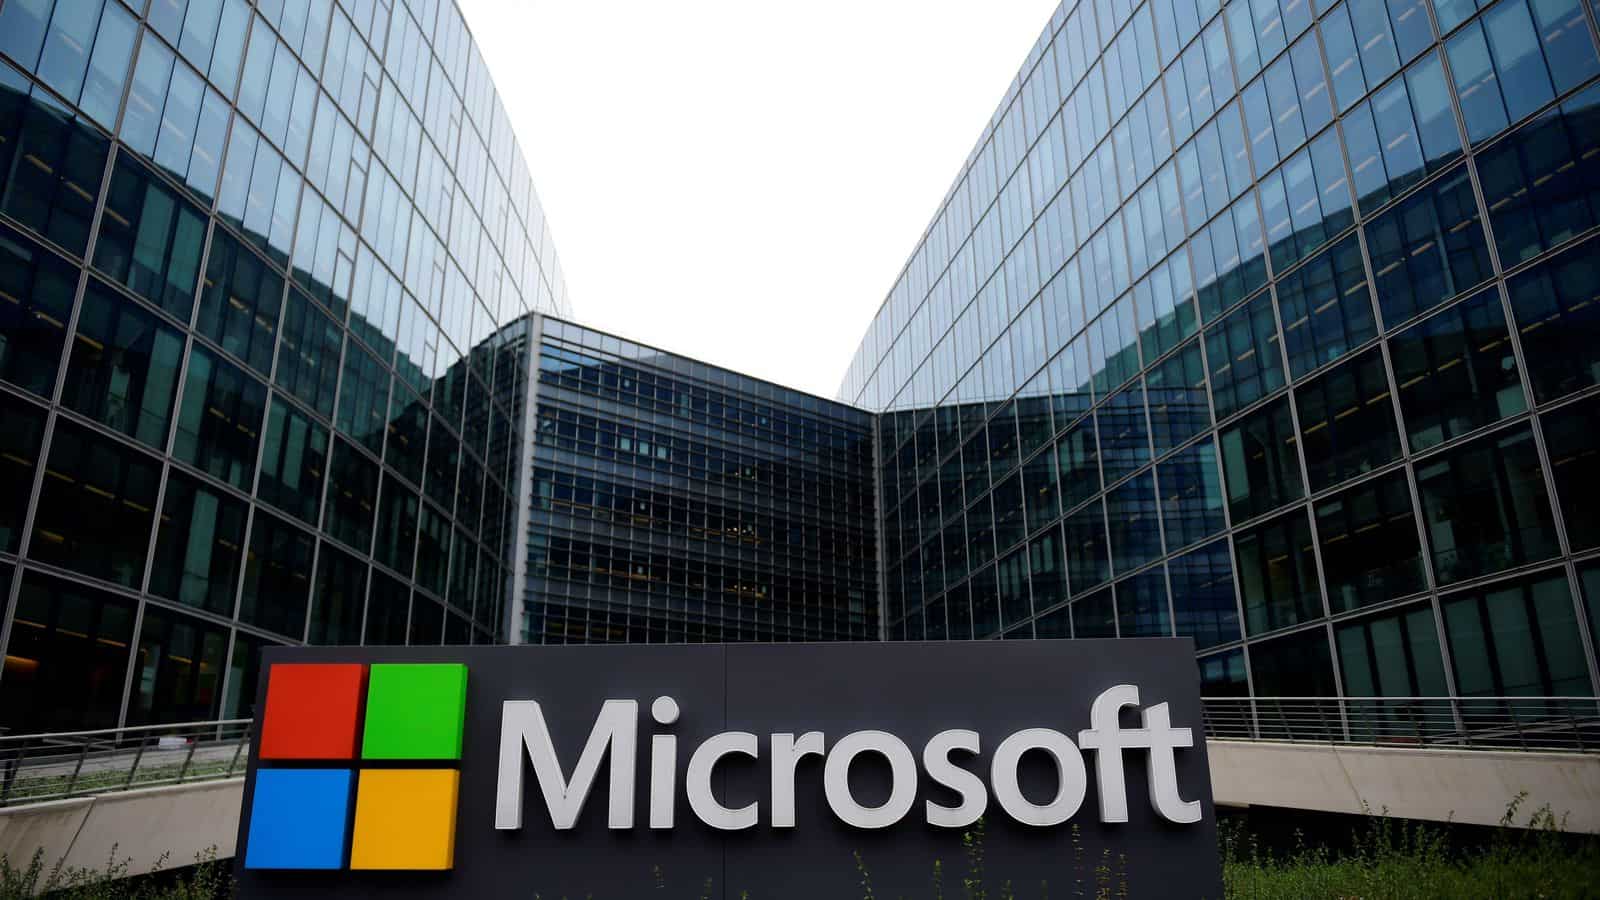 Google, NVIDIA give key evidence to FTC relating to Microsoft-Activision  merger